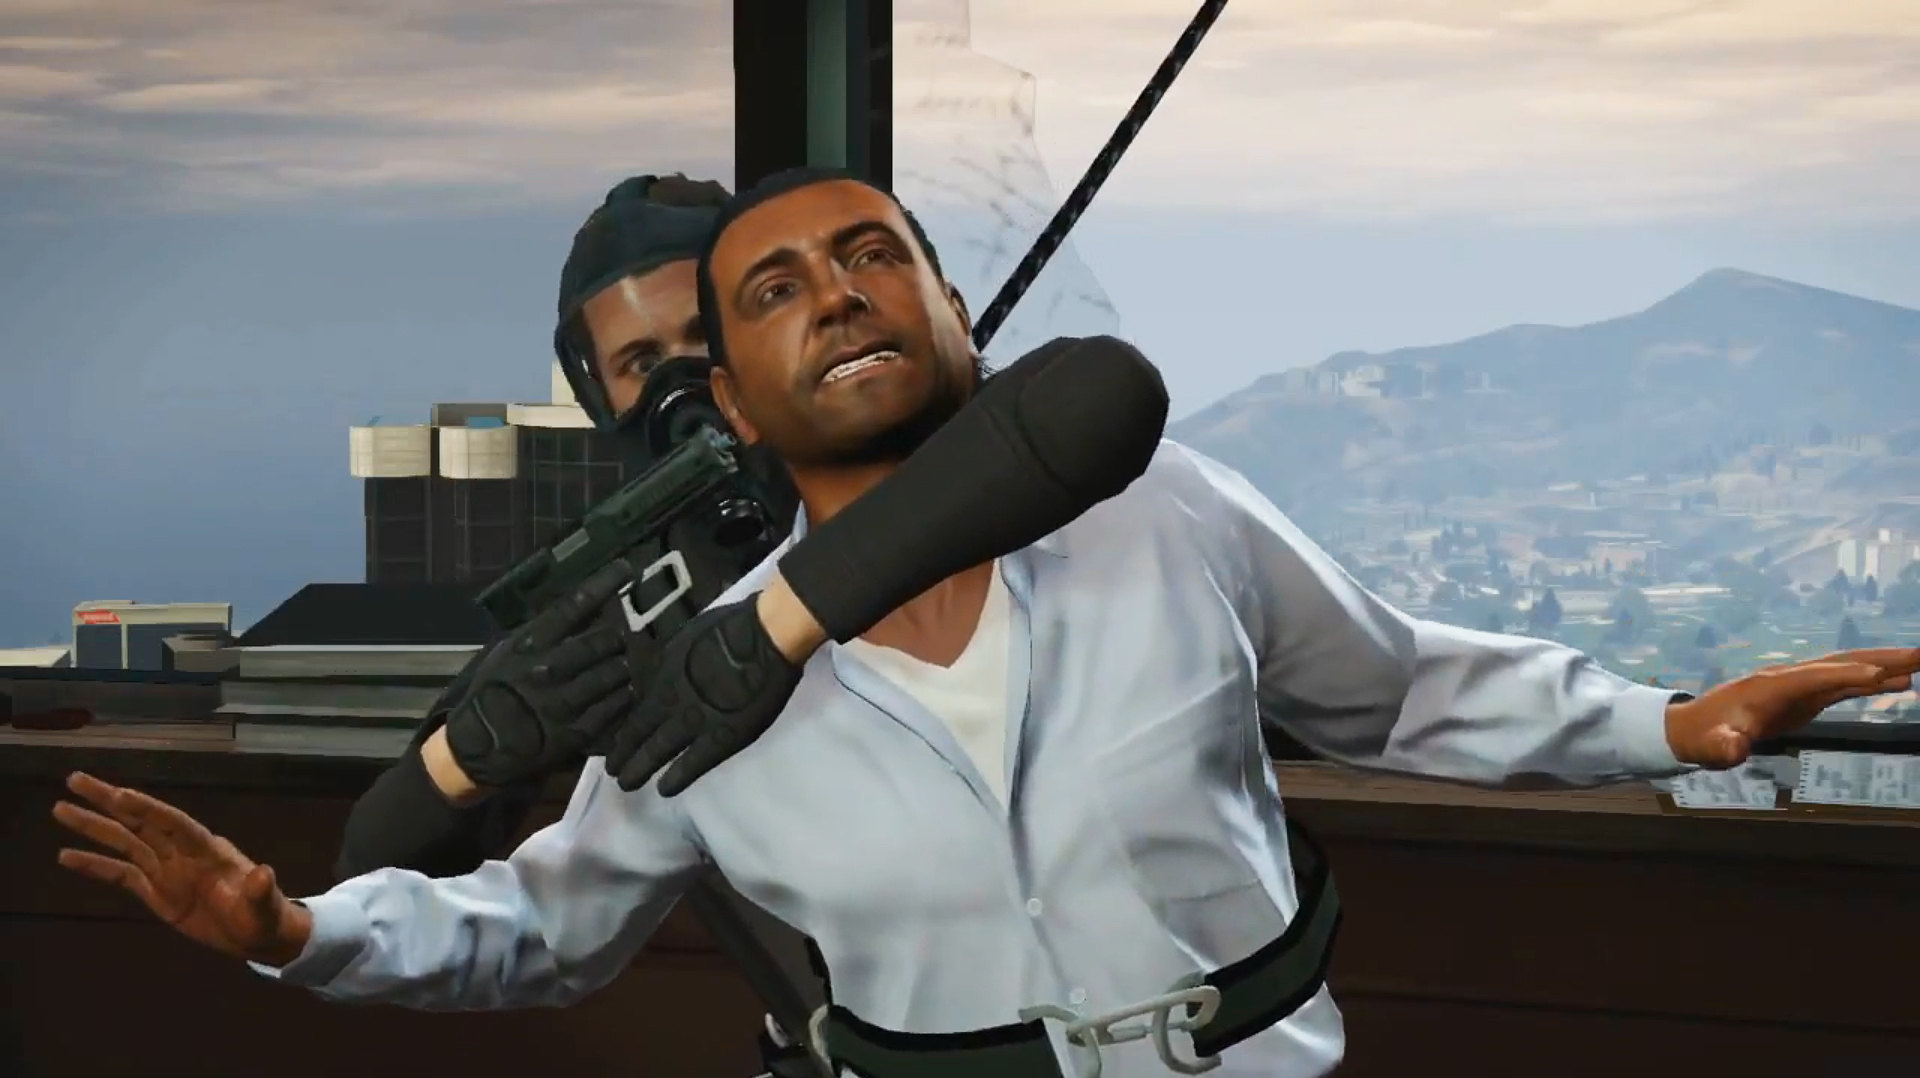 first-grand-theft-auto-v-gameplay-video-released-4.jpg